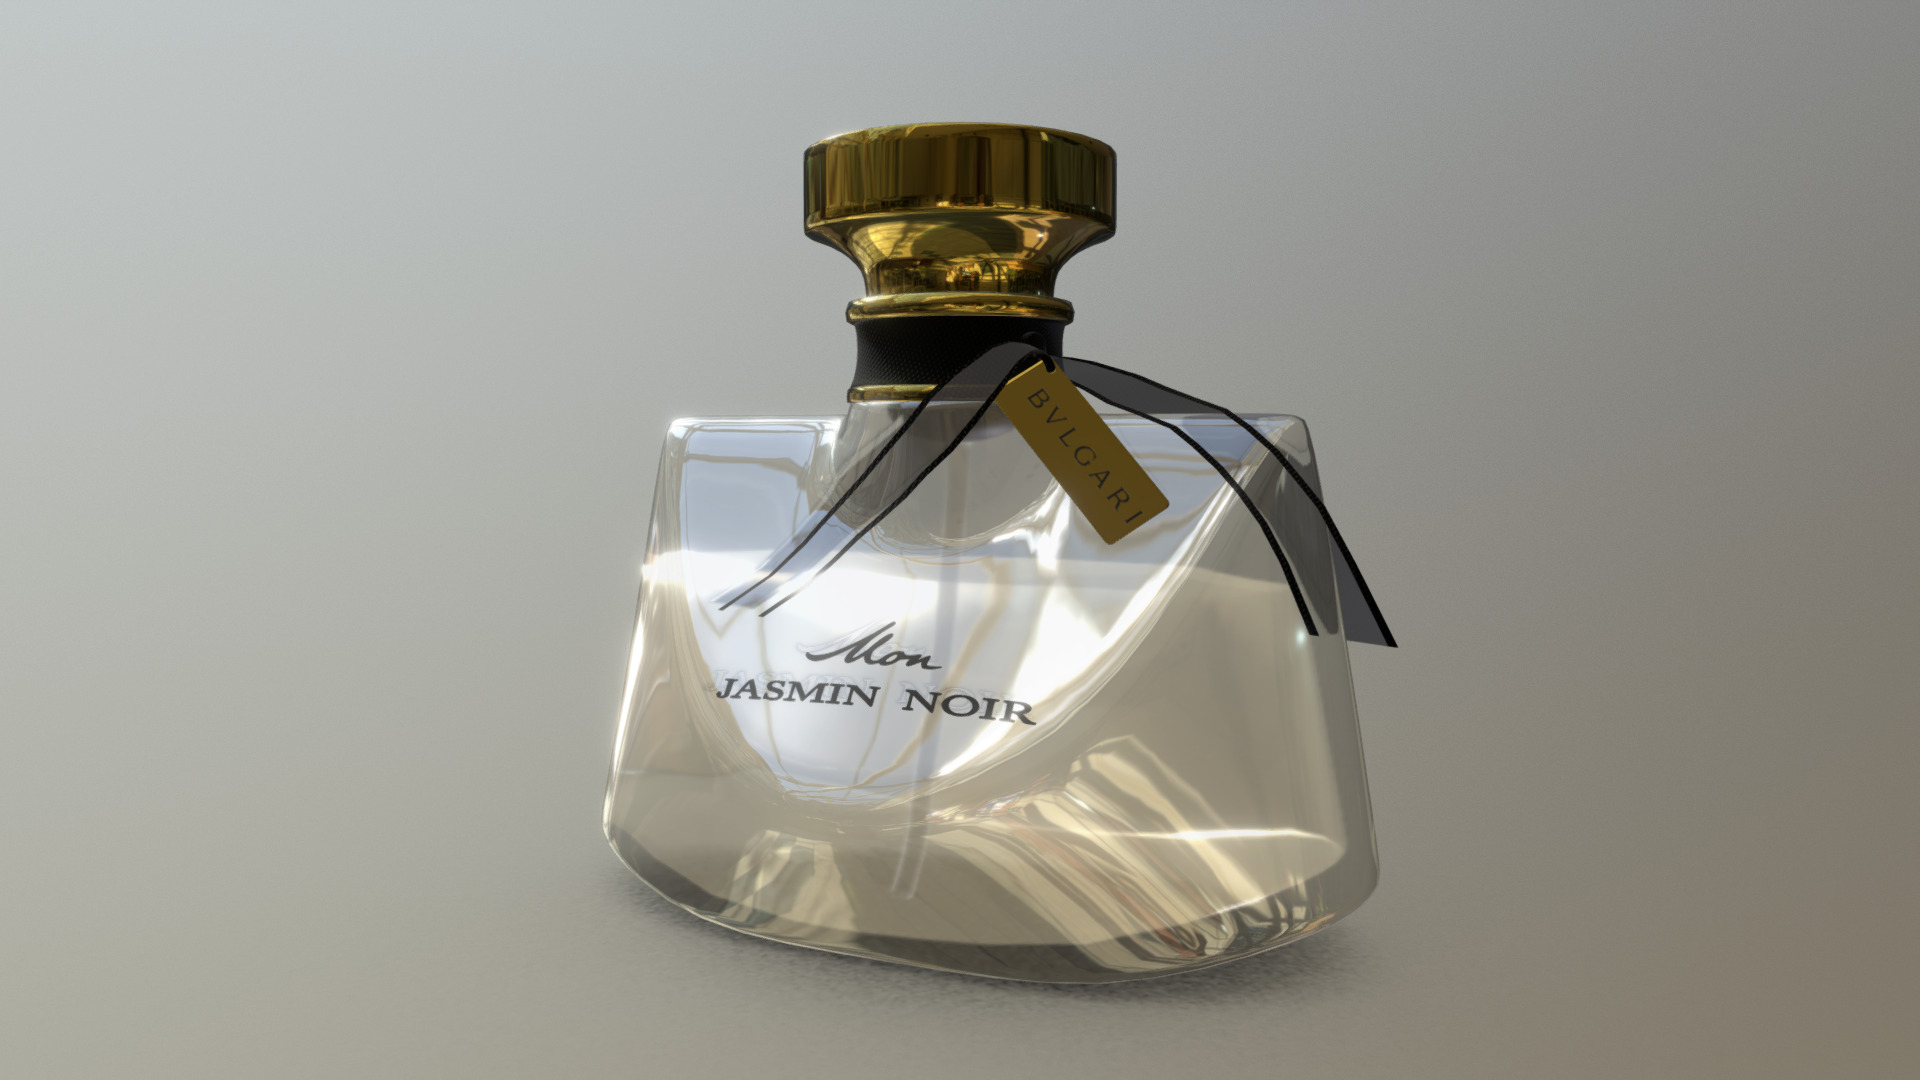 3D model Bvlgari Mon Jasmin Noir - This is a 3D model of the Bvlgari Mon Jasmin Noir. The 3D model is about a glass bottle with a yellow label.